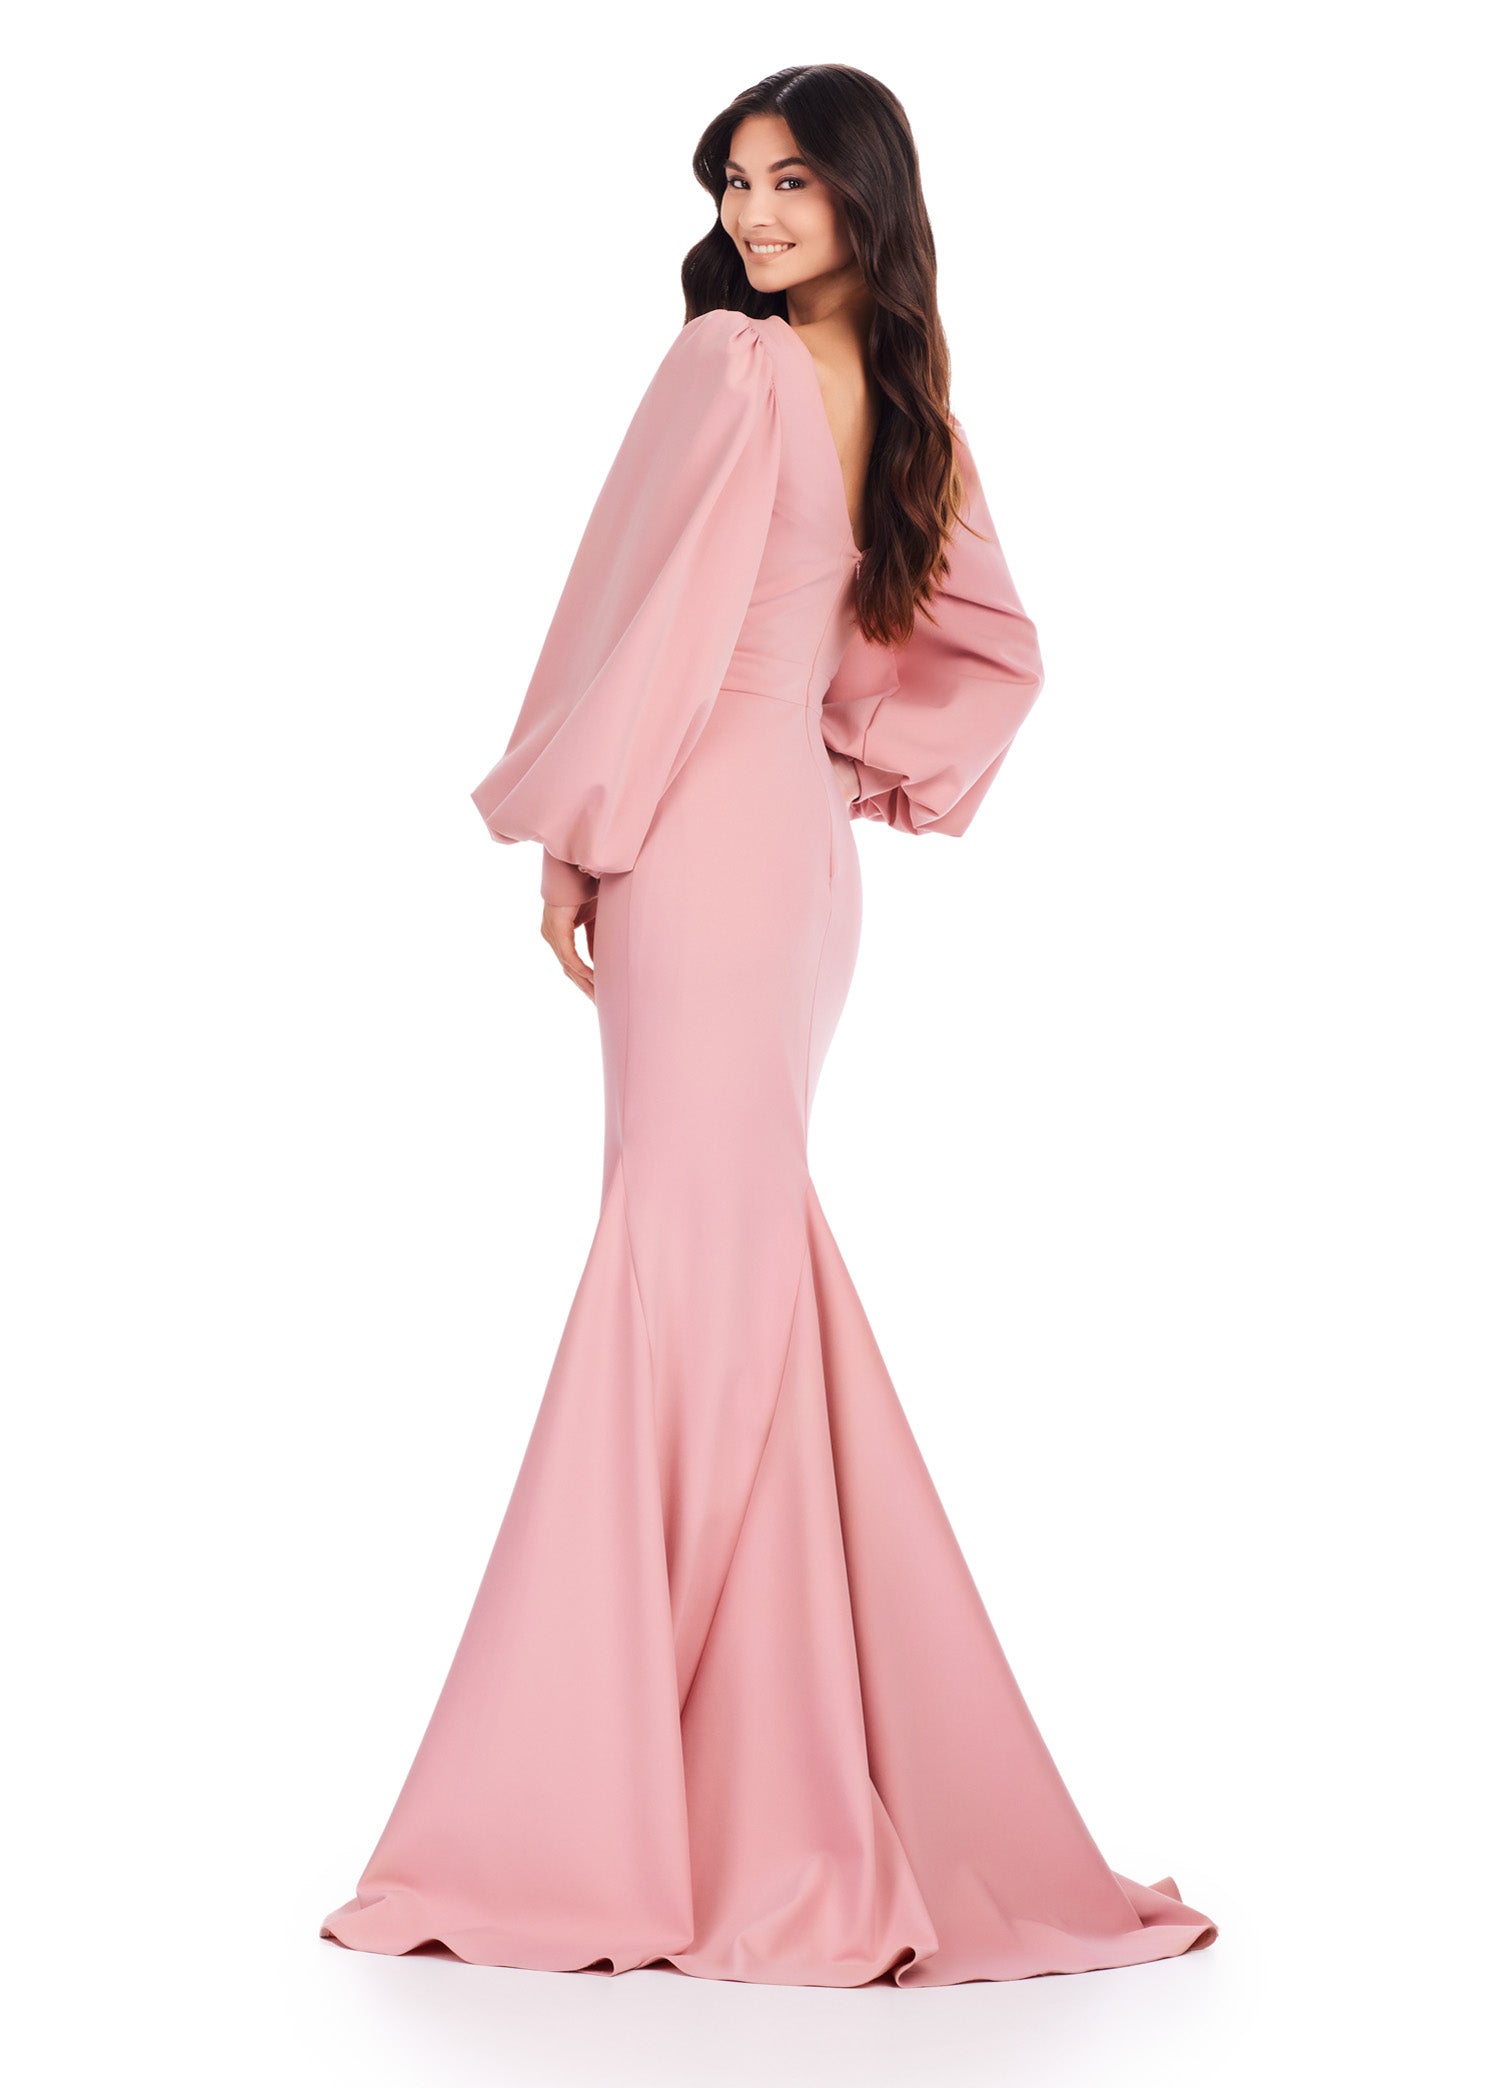 As an industry expert, the Ashley Lauren 11345 Long Prom Dress offers a sophisticated and elegant style suitable for formal occasions. This v-neckline, bishop sleeved gown boasts a stunning silhouette that flatters the wearer's figure. Crafted with high-quality materials, this dress is sure to make a lasting impression. With class and elegance, this beautiful evening gown is sure to stun. This fitted gown features an elegant draped v-neckline. The look is accented with bishop sleeves and a sweep train.